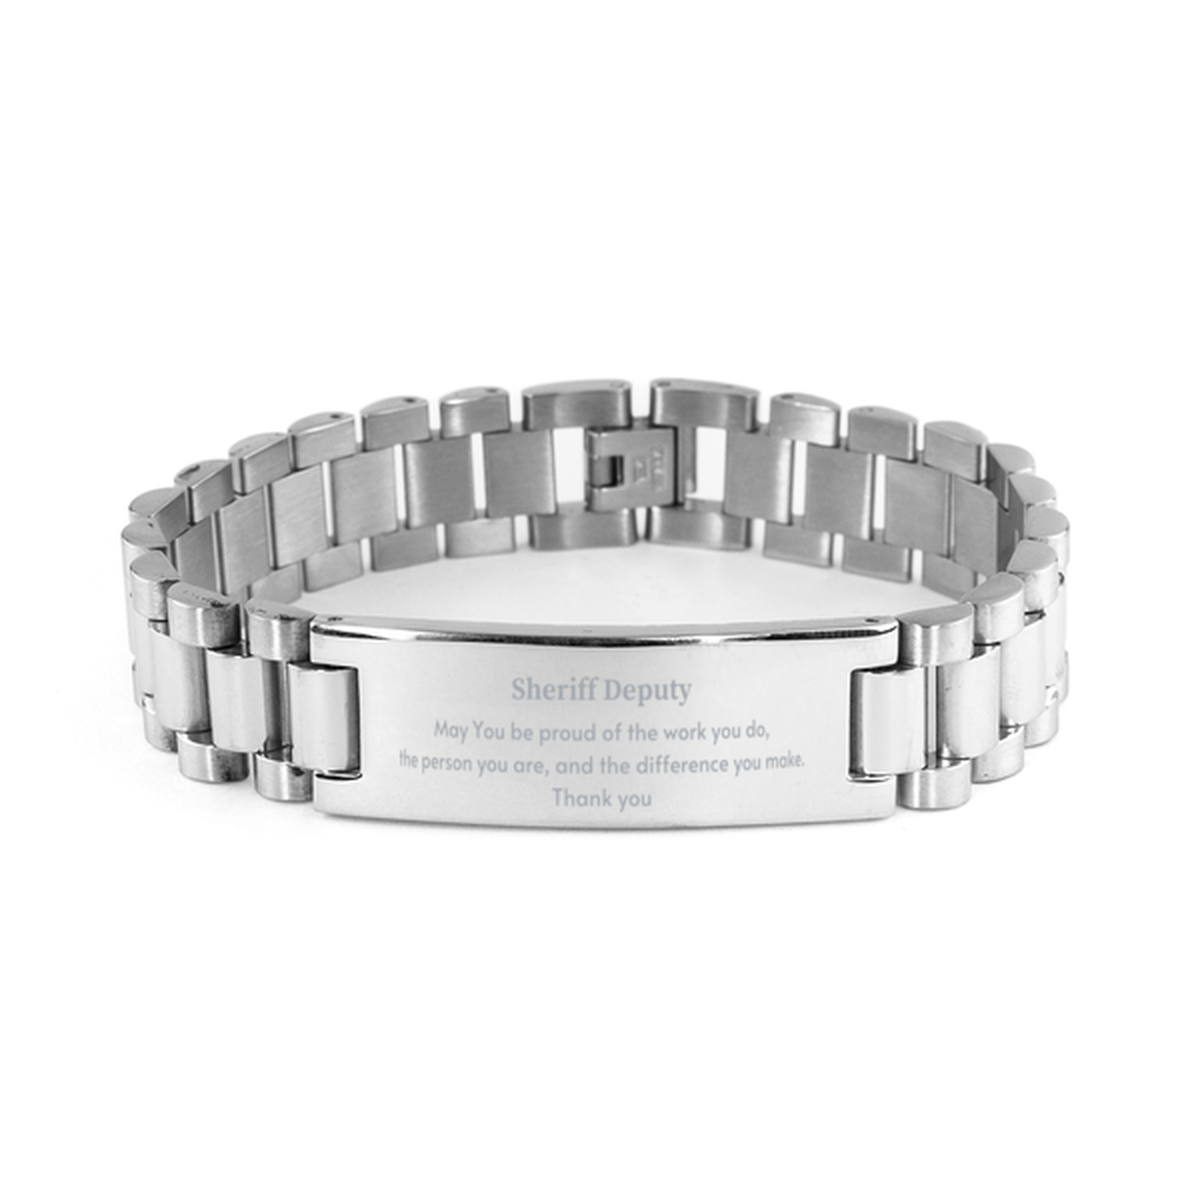 Heartwarming Ladder Stainless Steel Bracelet Retirement Coworkers Gifts for Sheriff Deputy, Sheriff Deputy May You be proud of the work you do, the person you are Gifts for Boss Men Women Friends